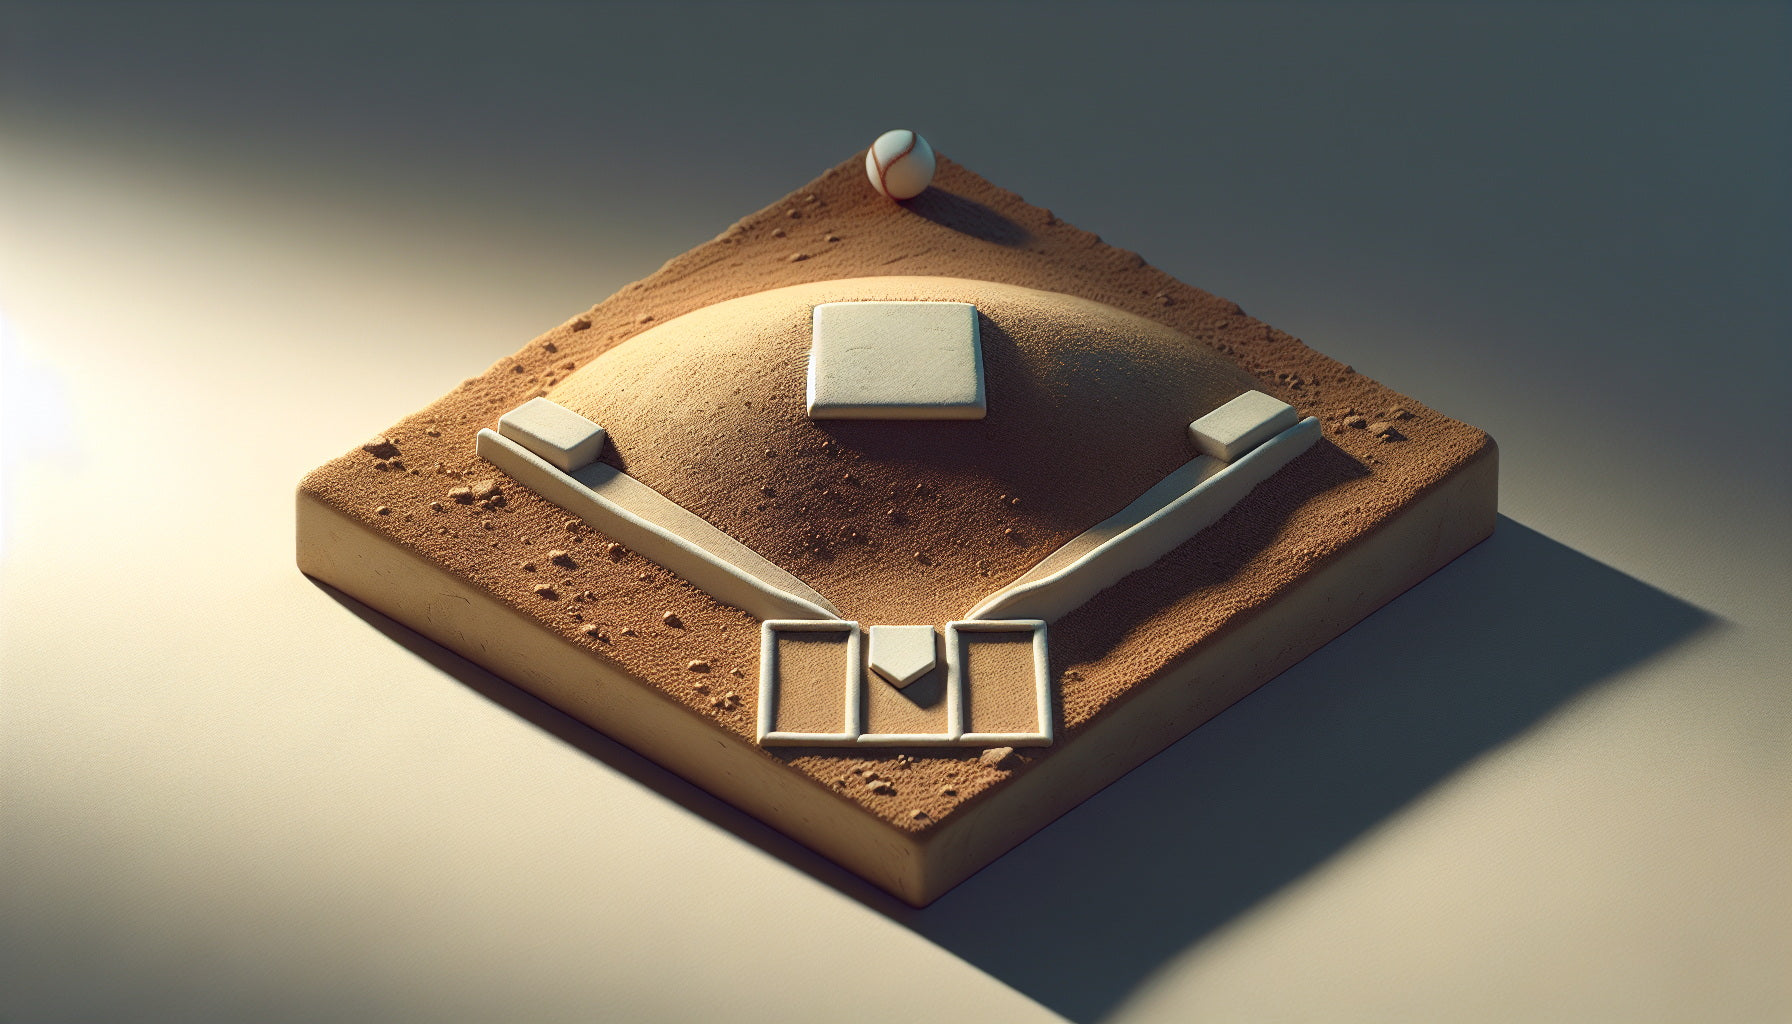 Illustration of a little league pitching mound